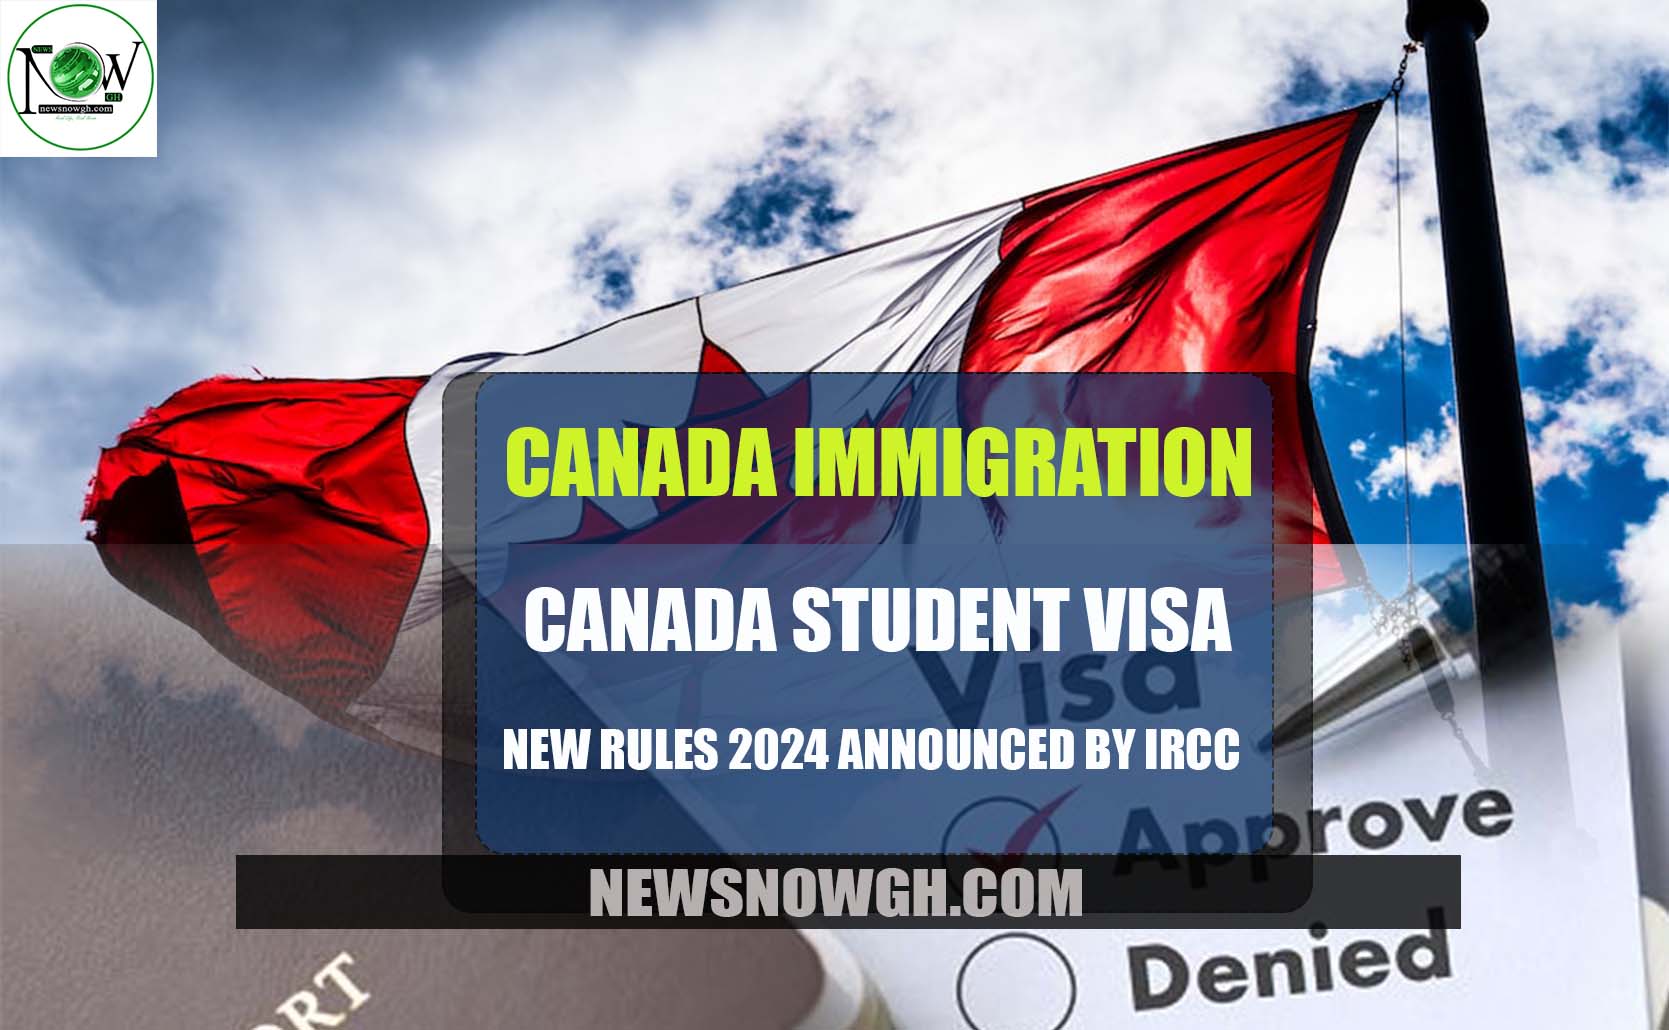 Canada Student Visa New Rules 2024 Announced by IRCC